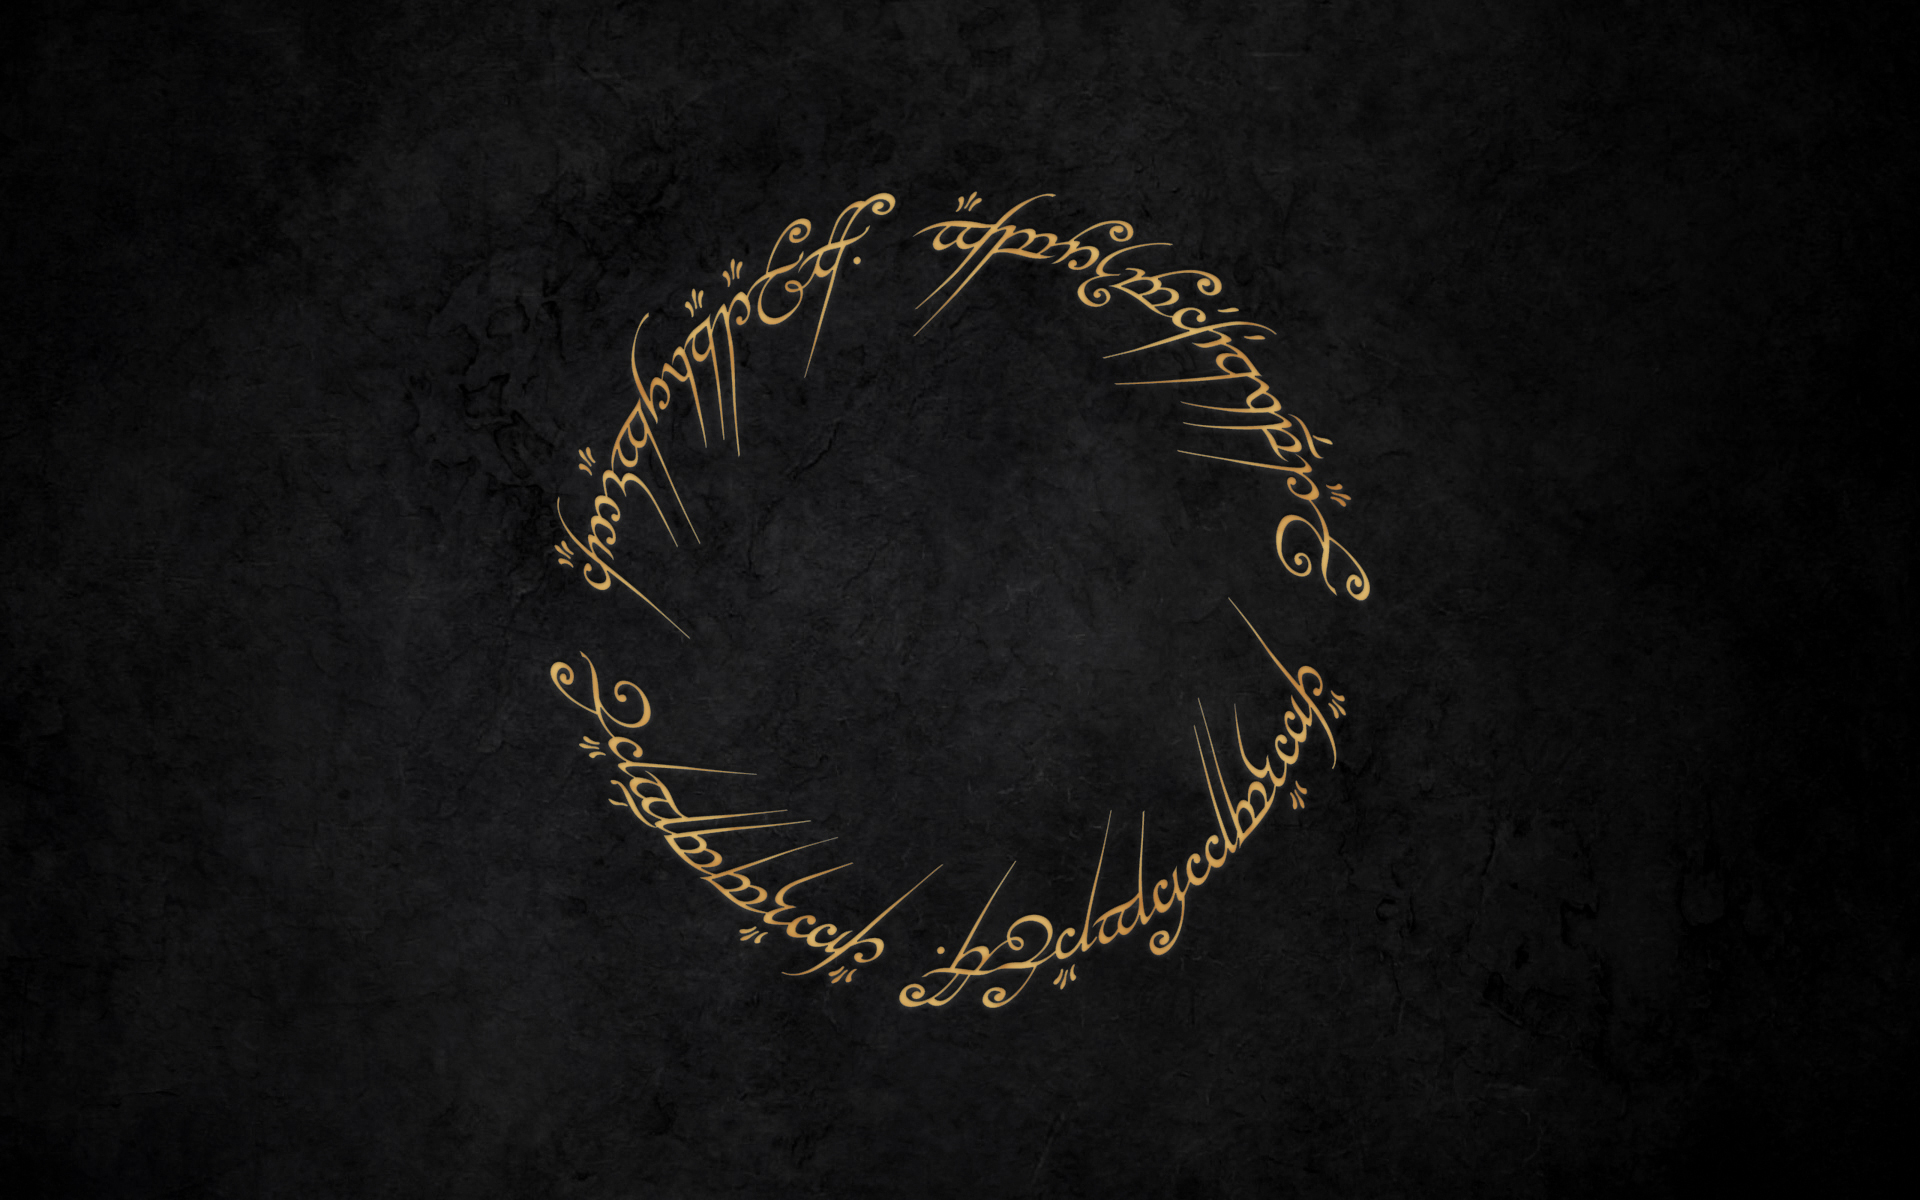 1920x1200 830+ The Lord of the Rings HD Wallpapers and Backgrounds